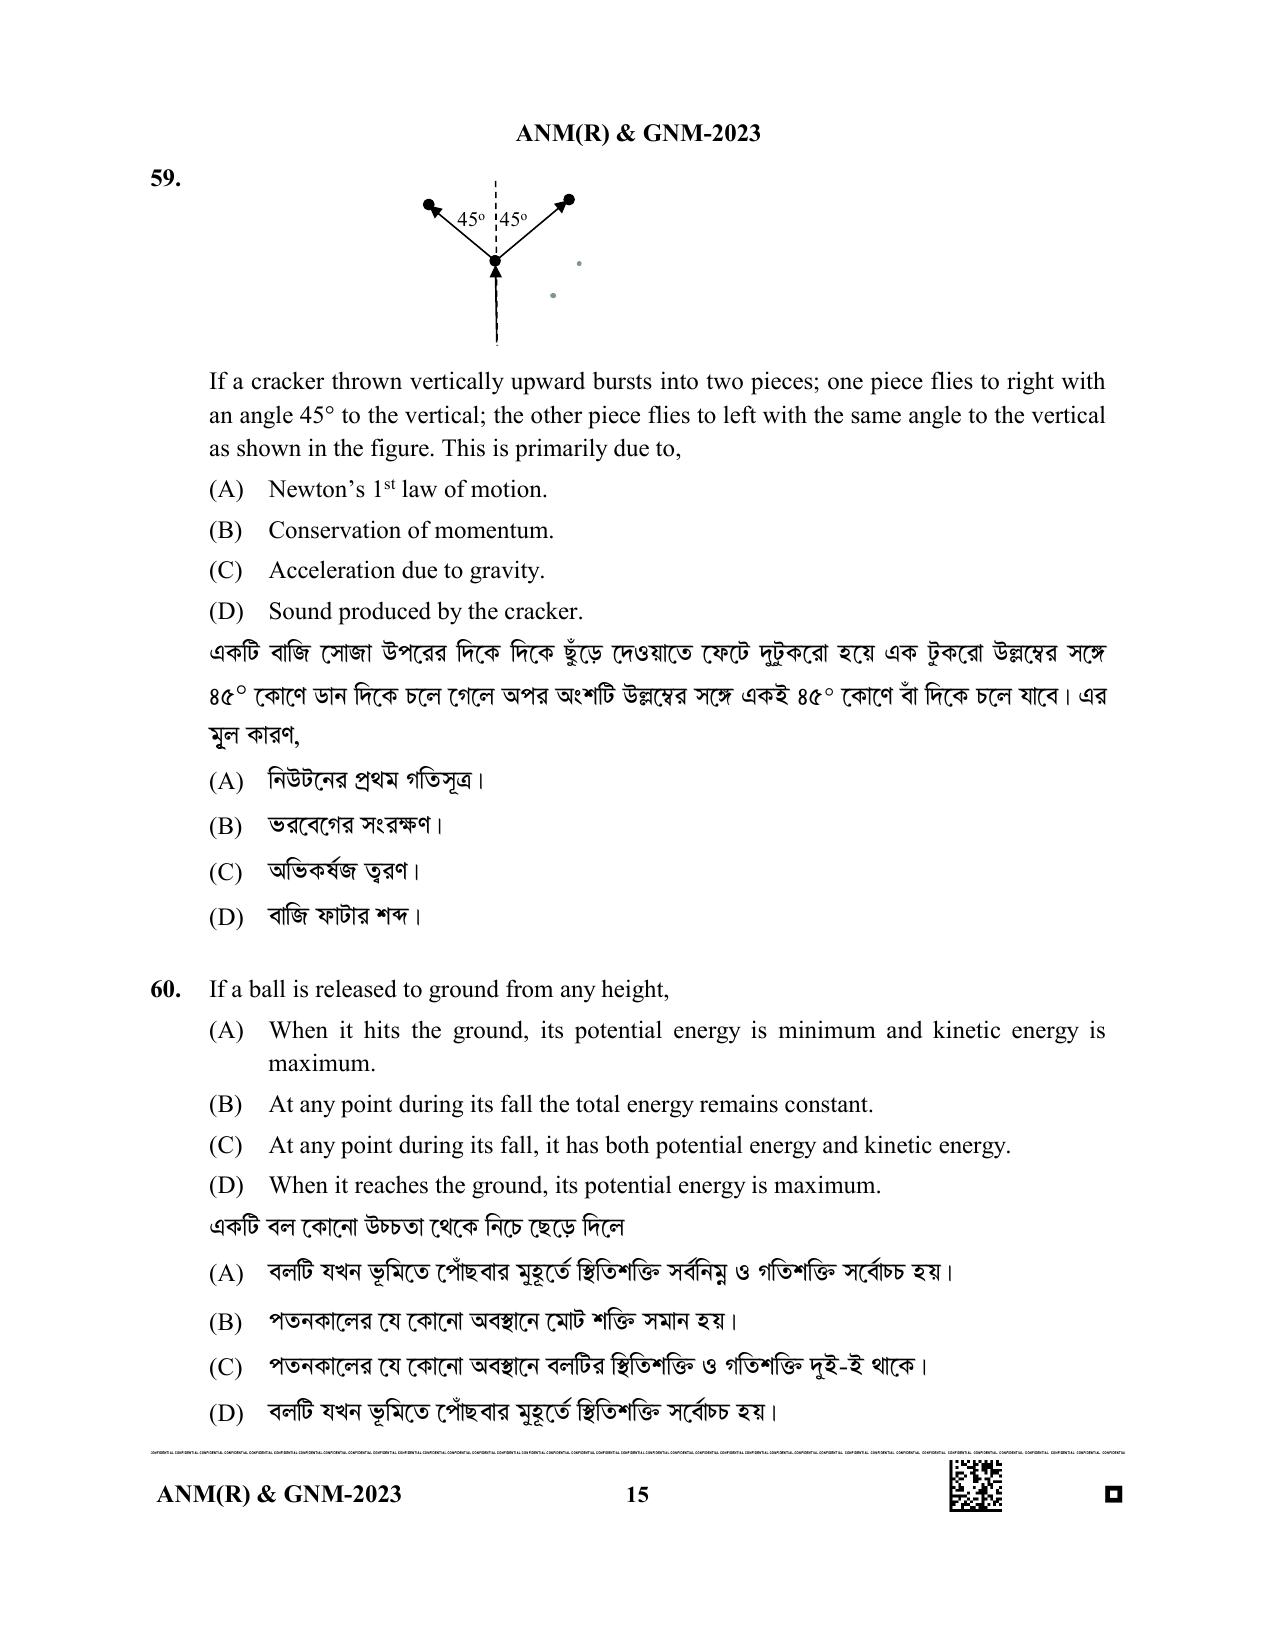 WB ANM GNM 2023 Question Paper - Page 15